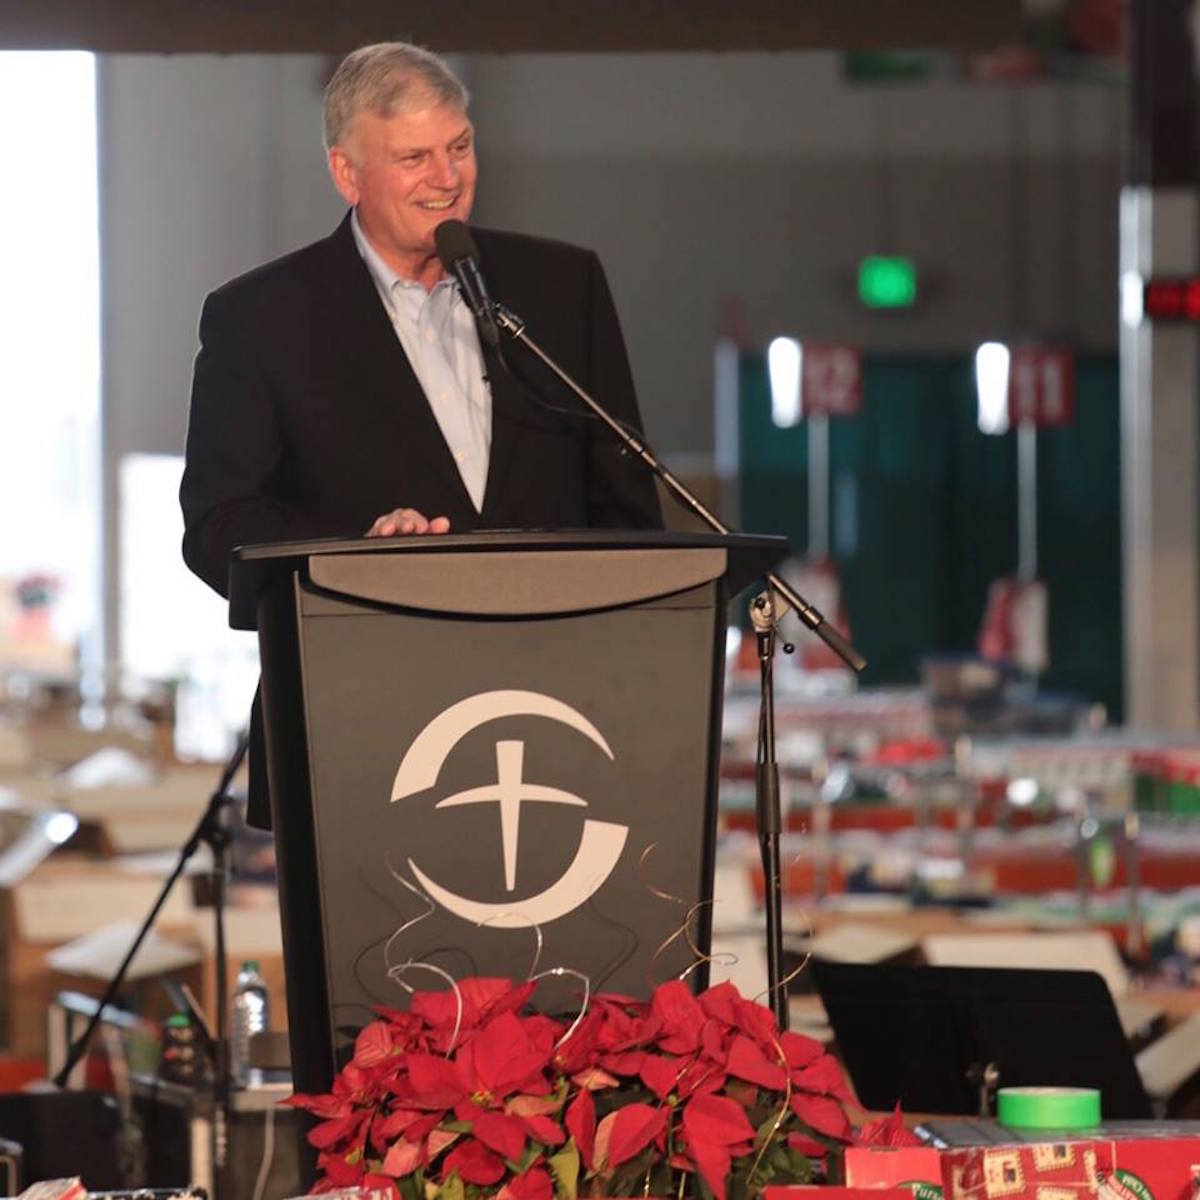 Facebook apologises to evangelist Franklin Graham for removing anti-trans post